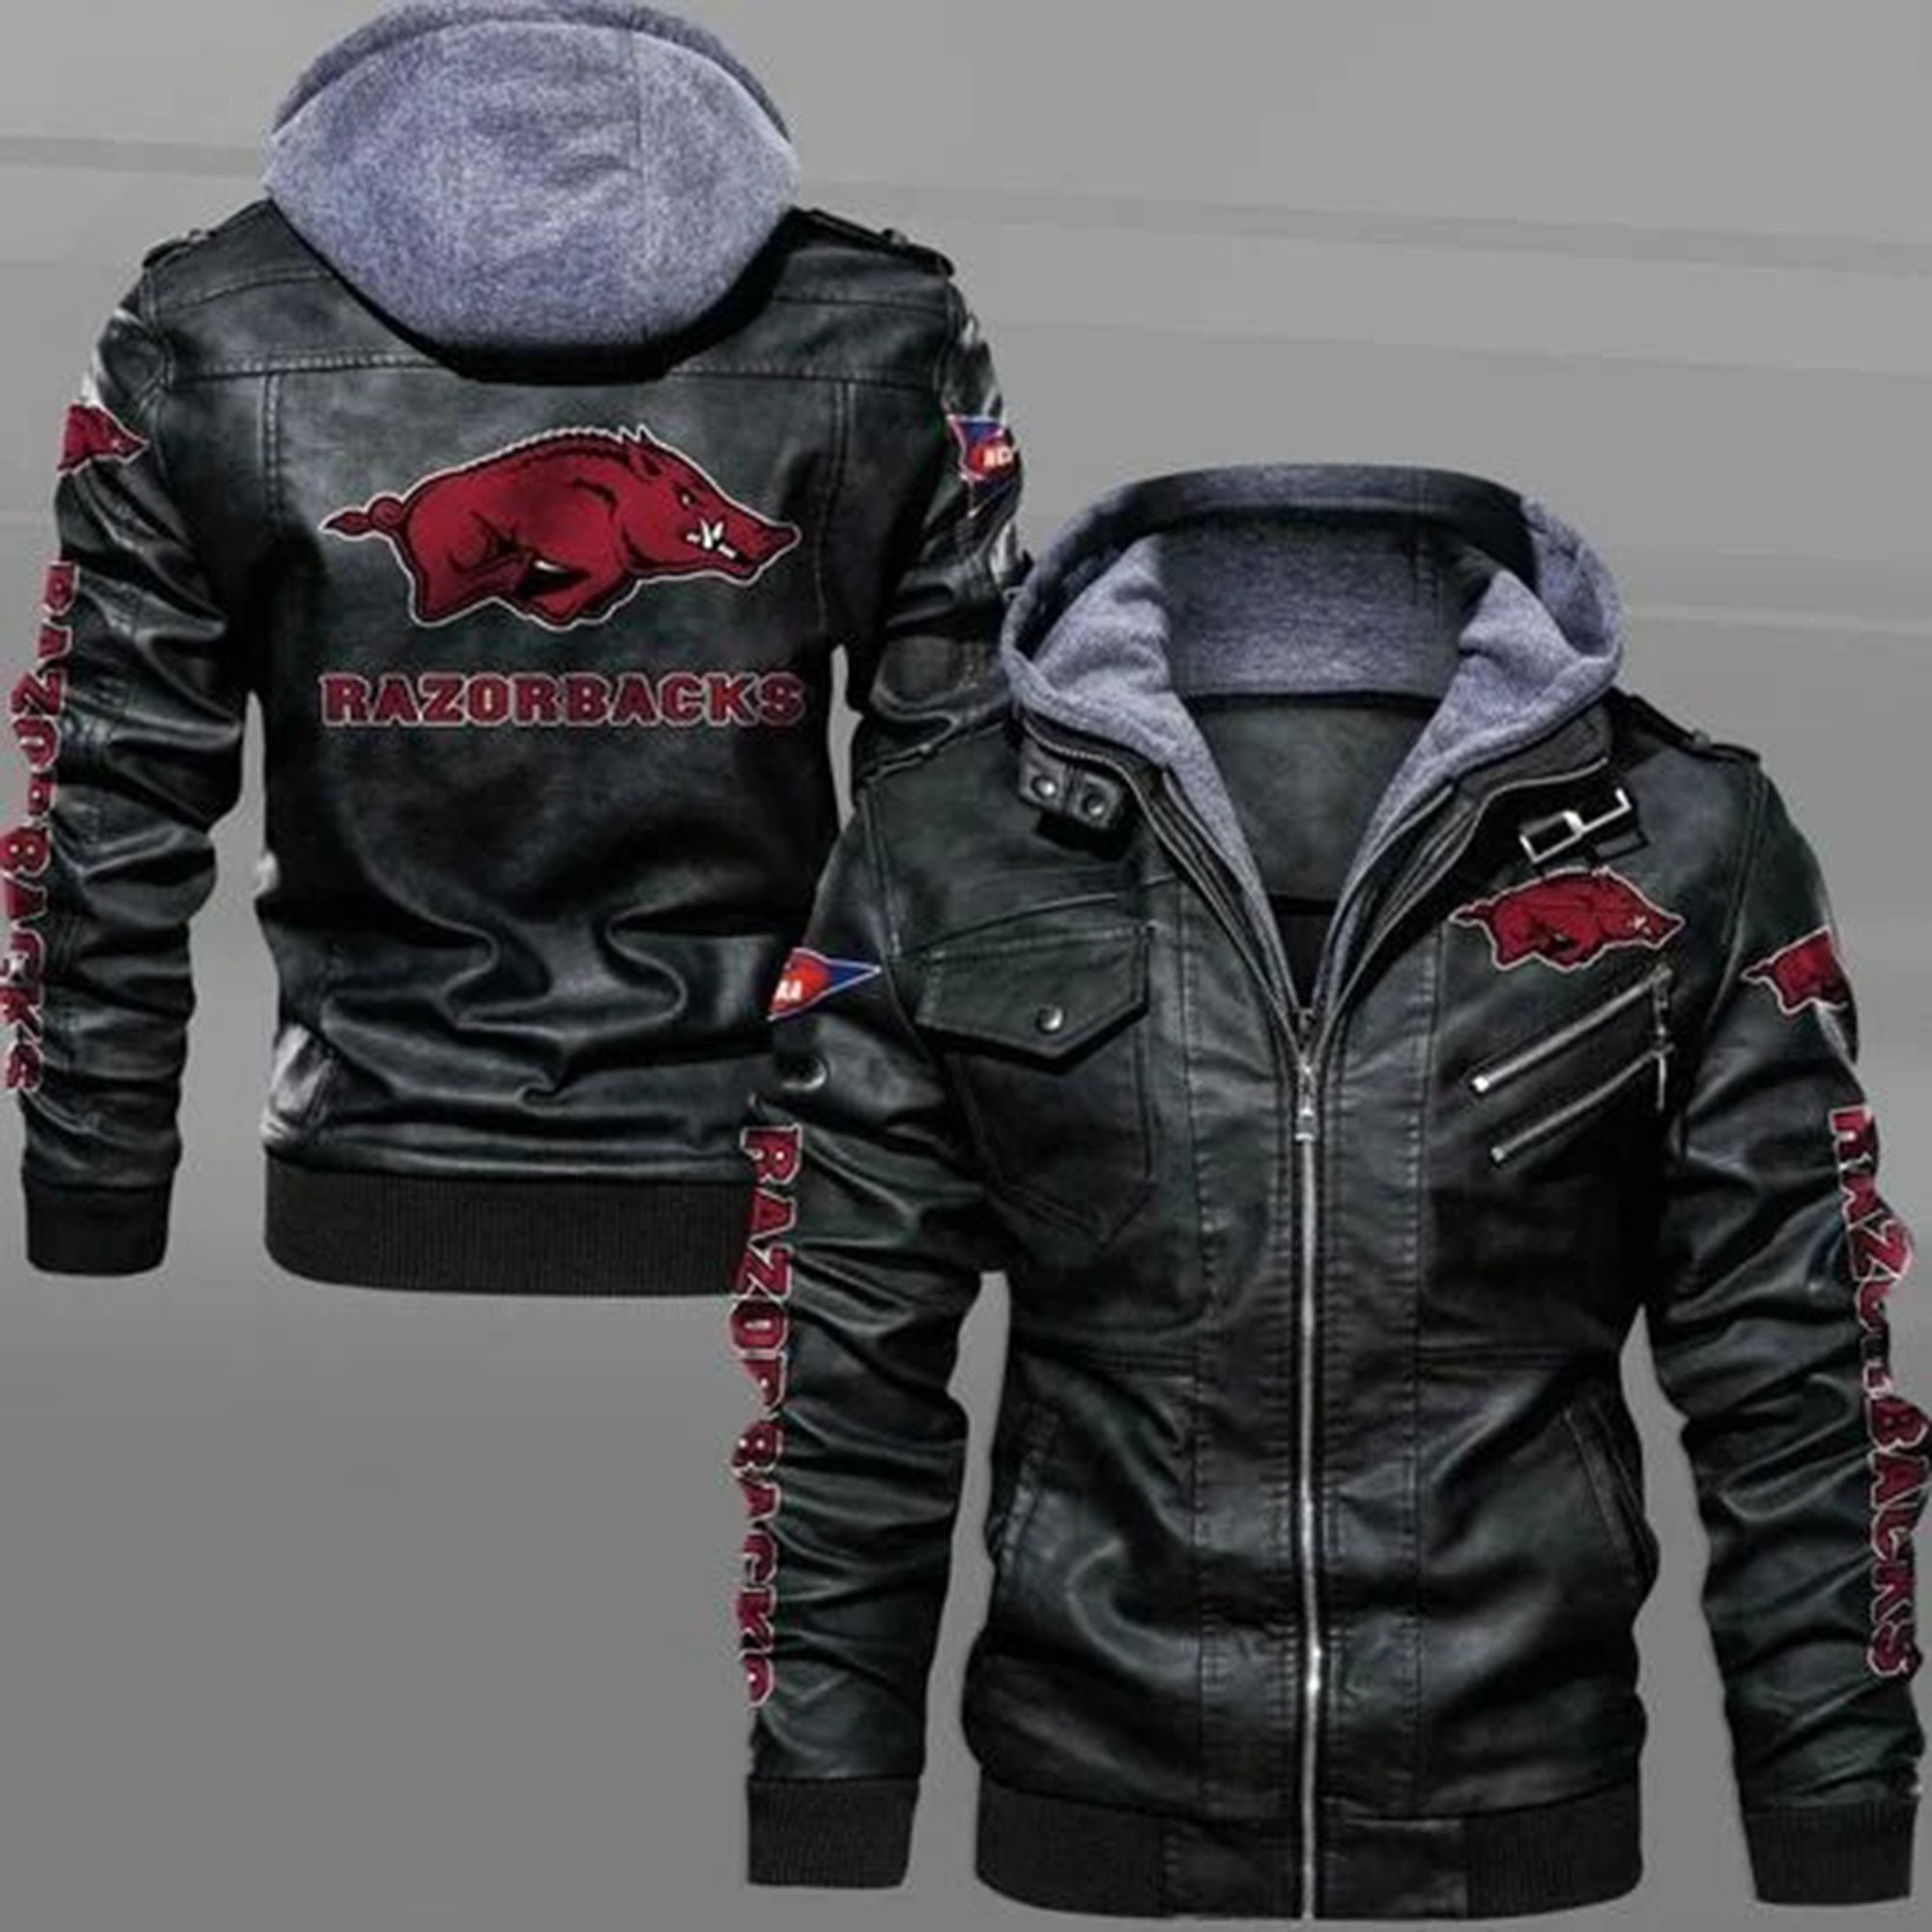 These Amazing Leather Jacket will add to the appeal of your outfit 207